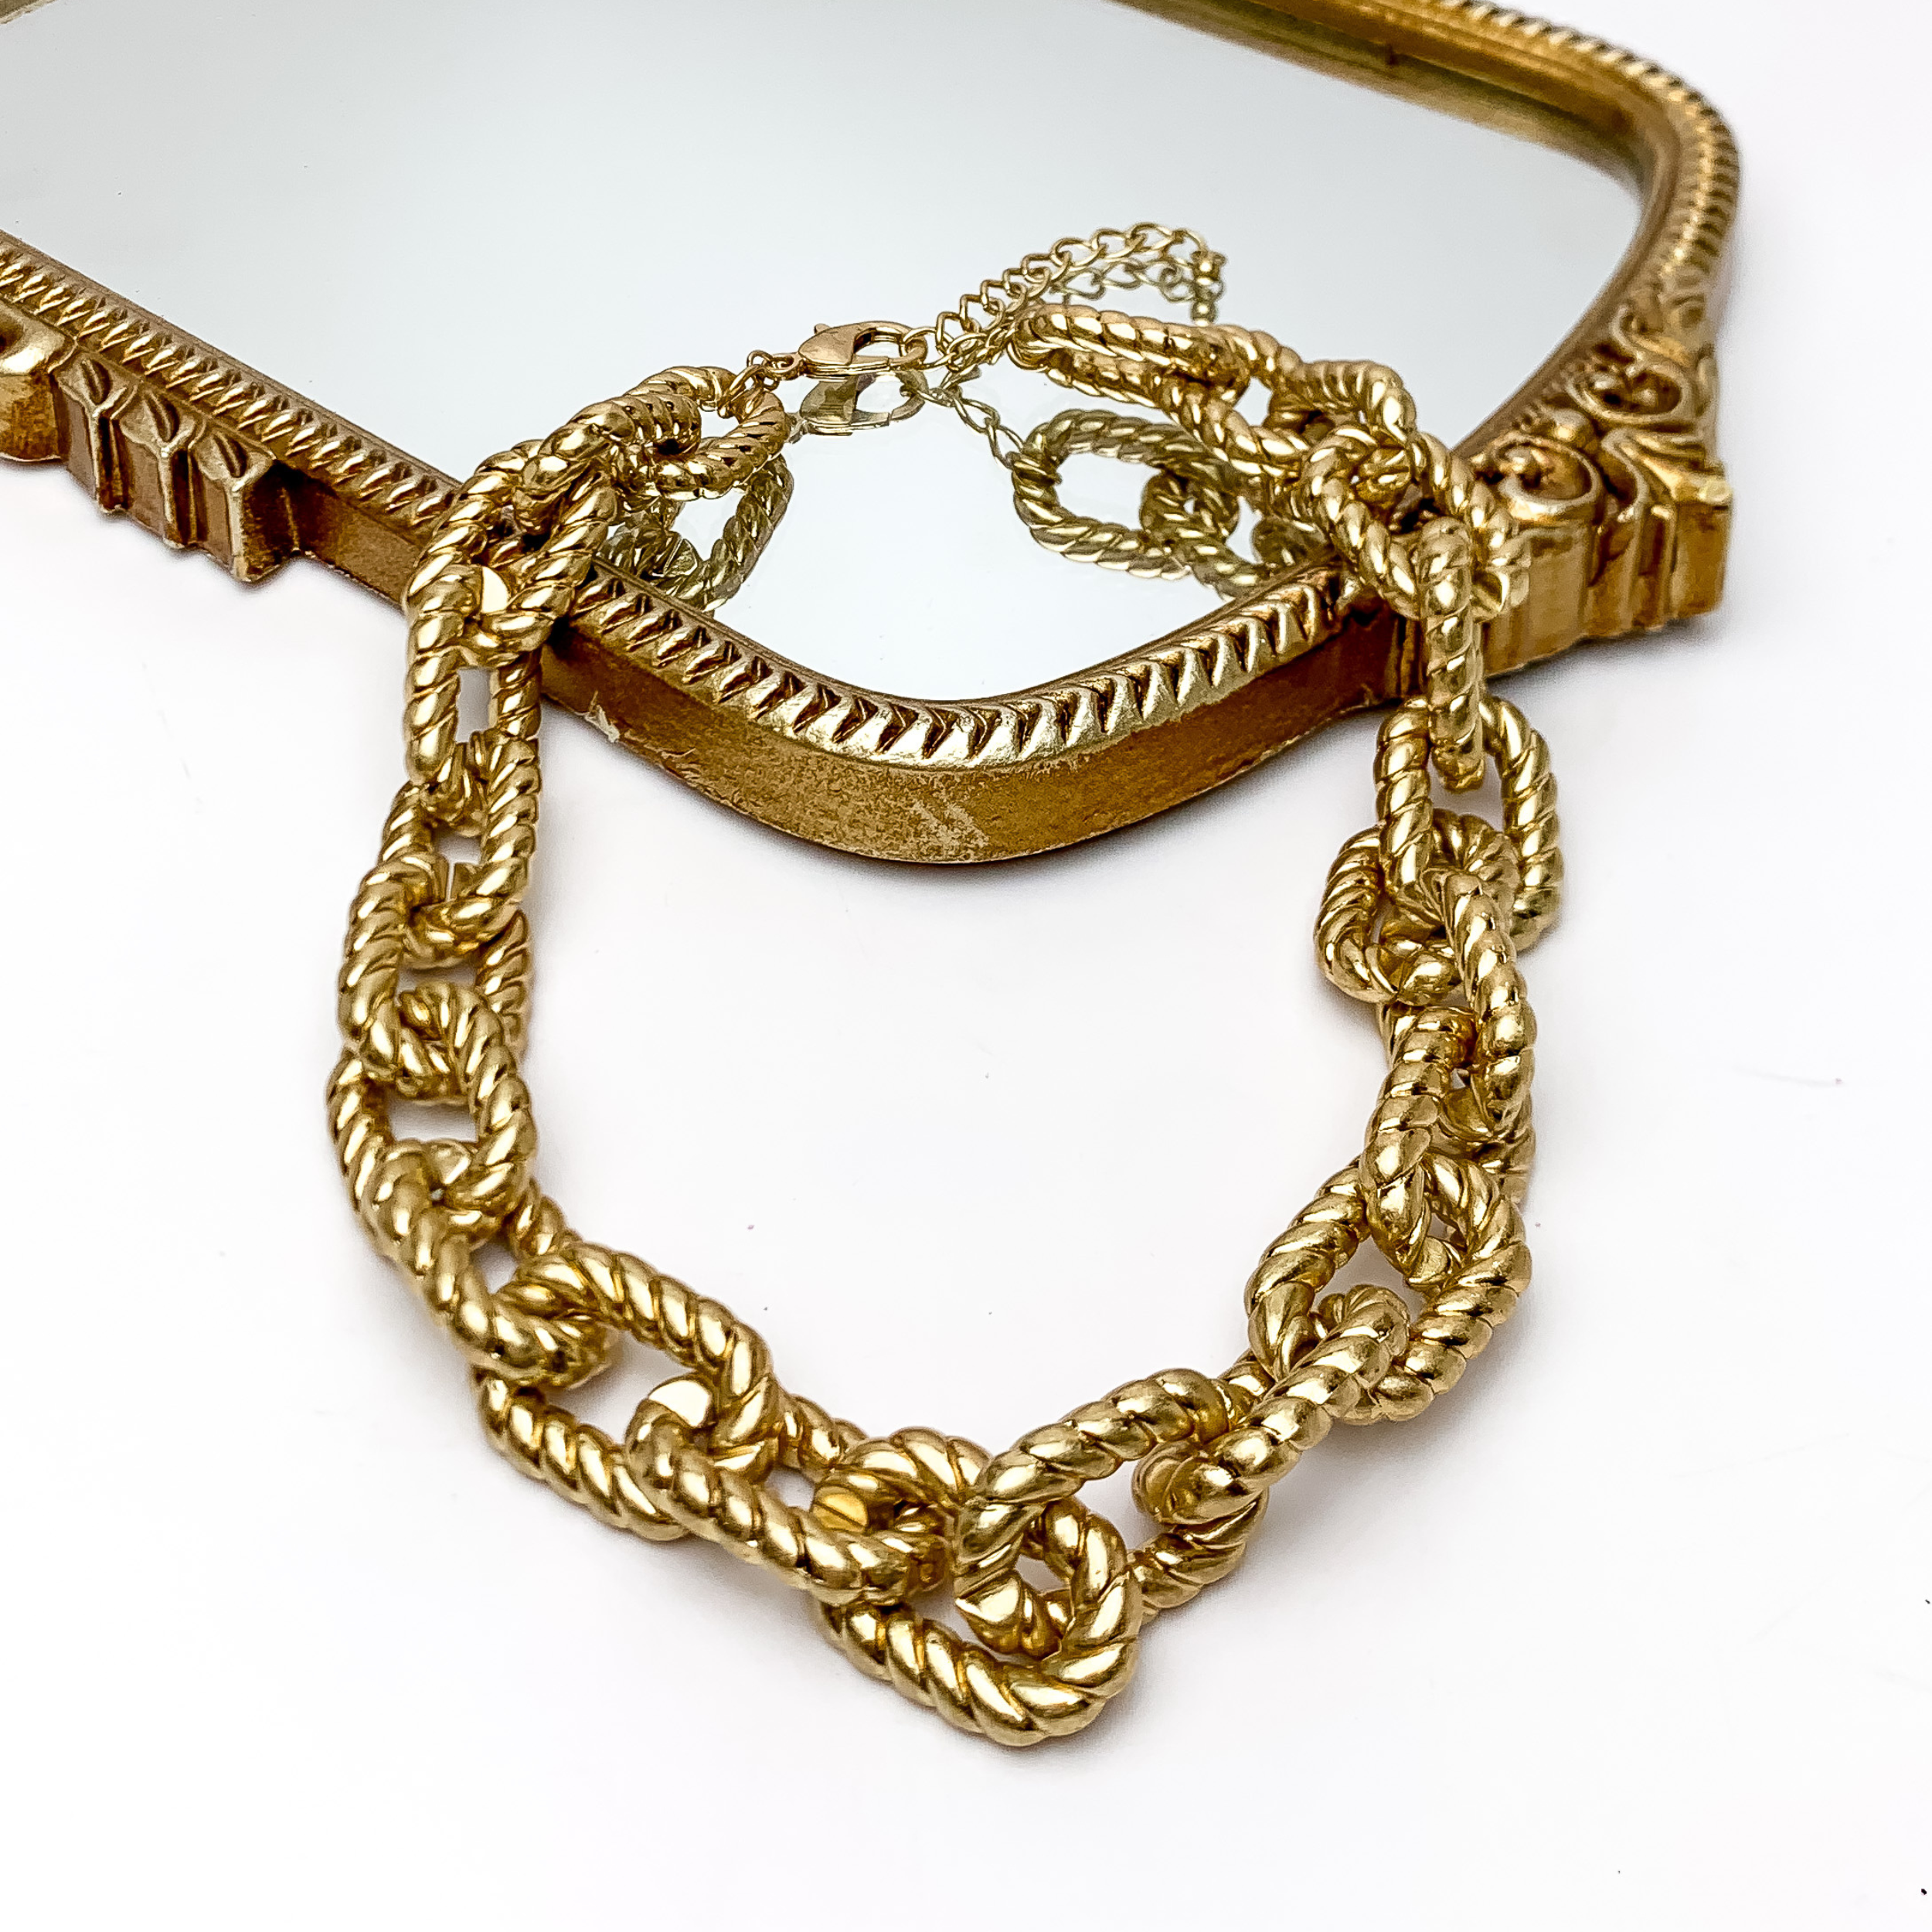 Gold Chain No. 3 Necklace. Pictured on a white background with part of the necklace on a gold trimmed mirror.